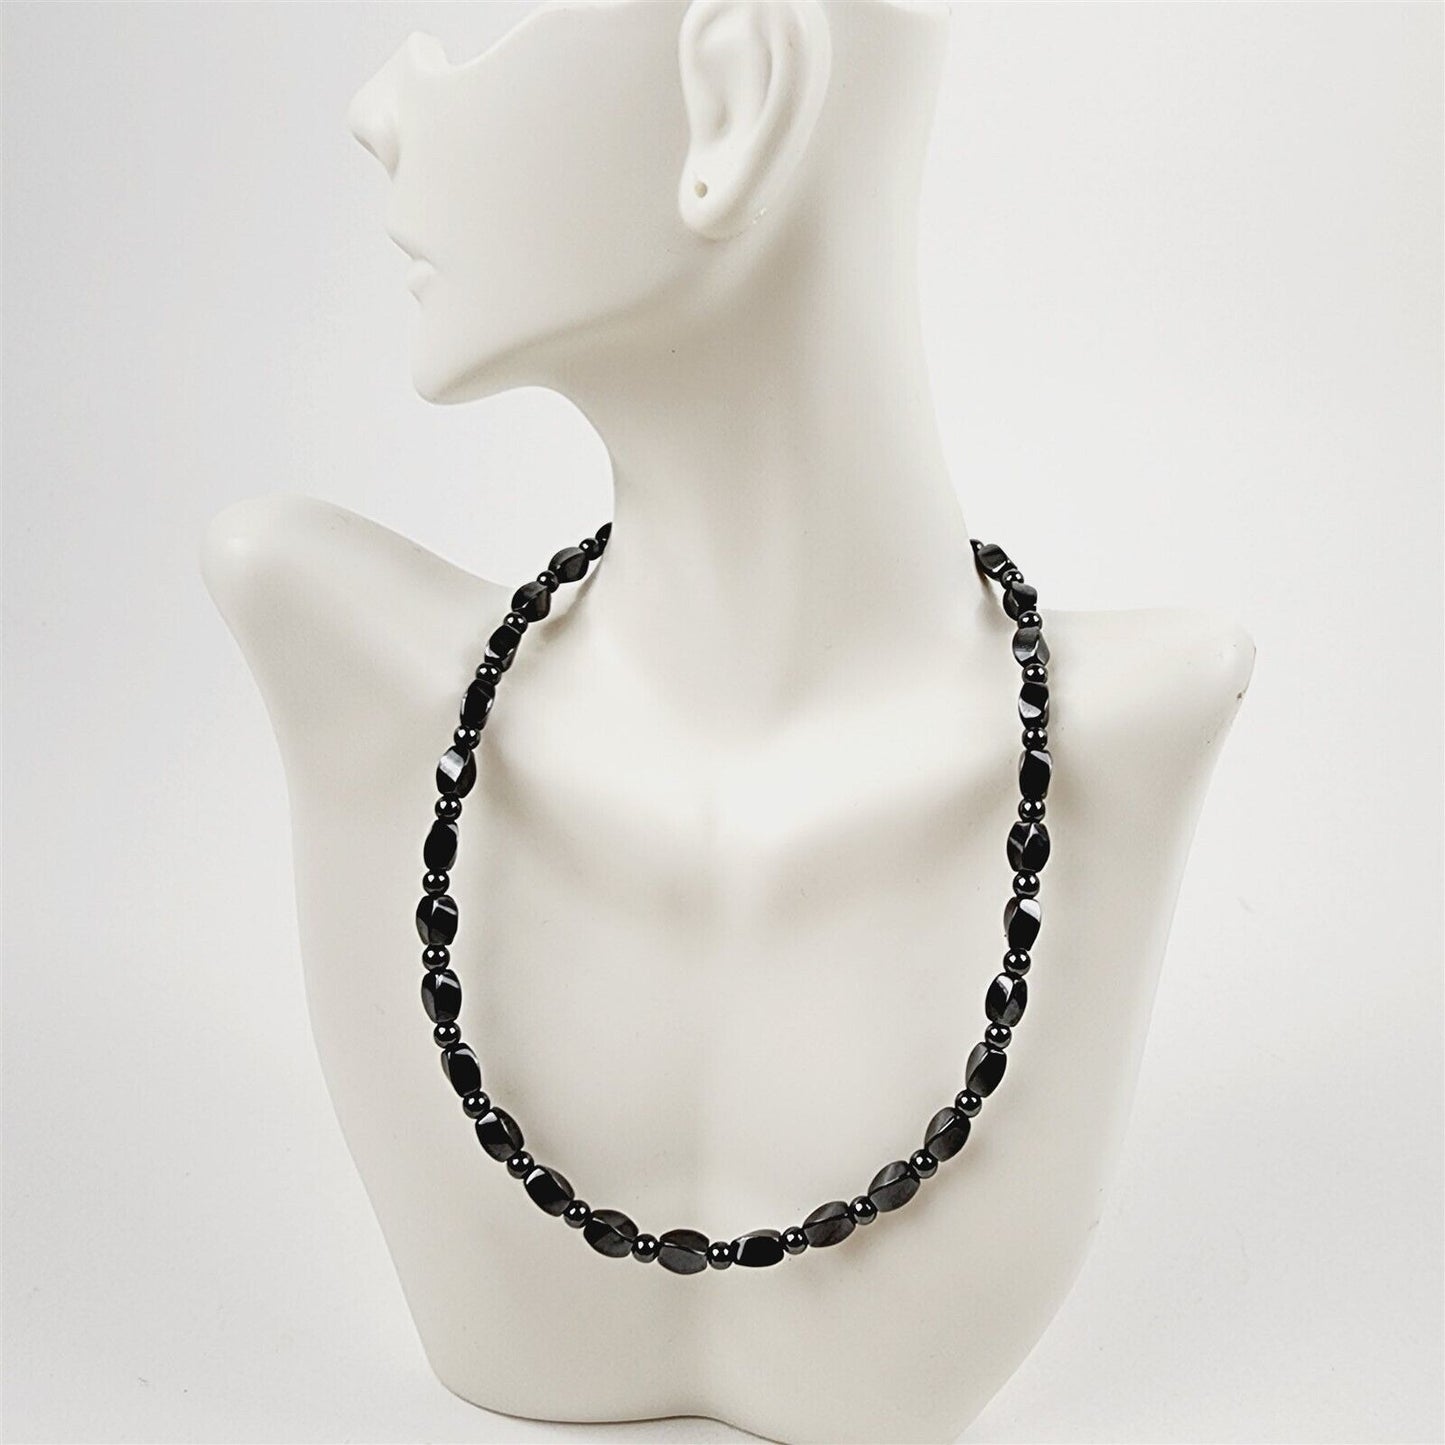 Black Short Twist Magnetic Beaded Necklace Therapeutic Handmade